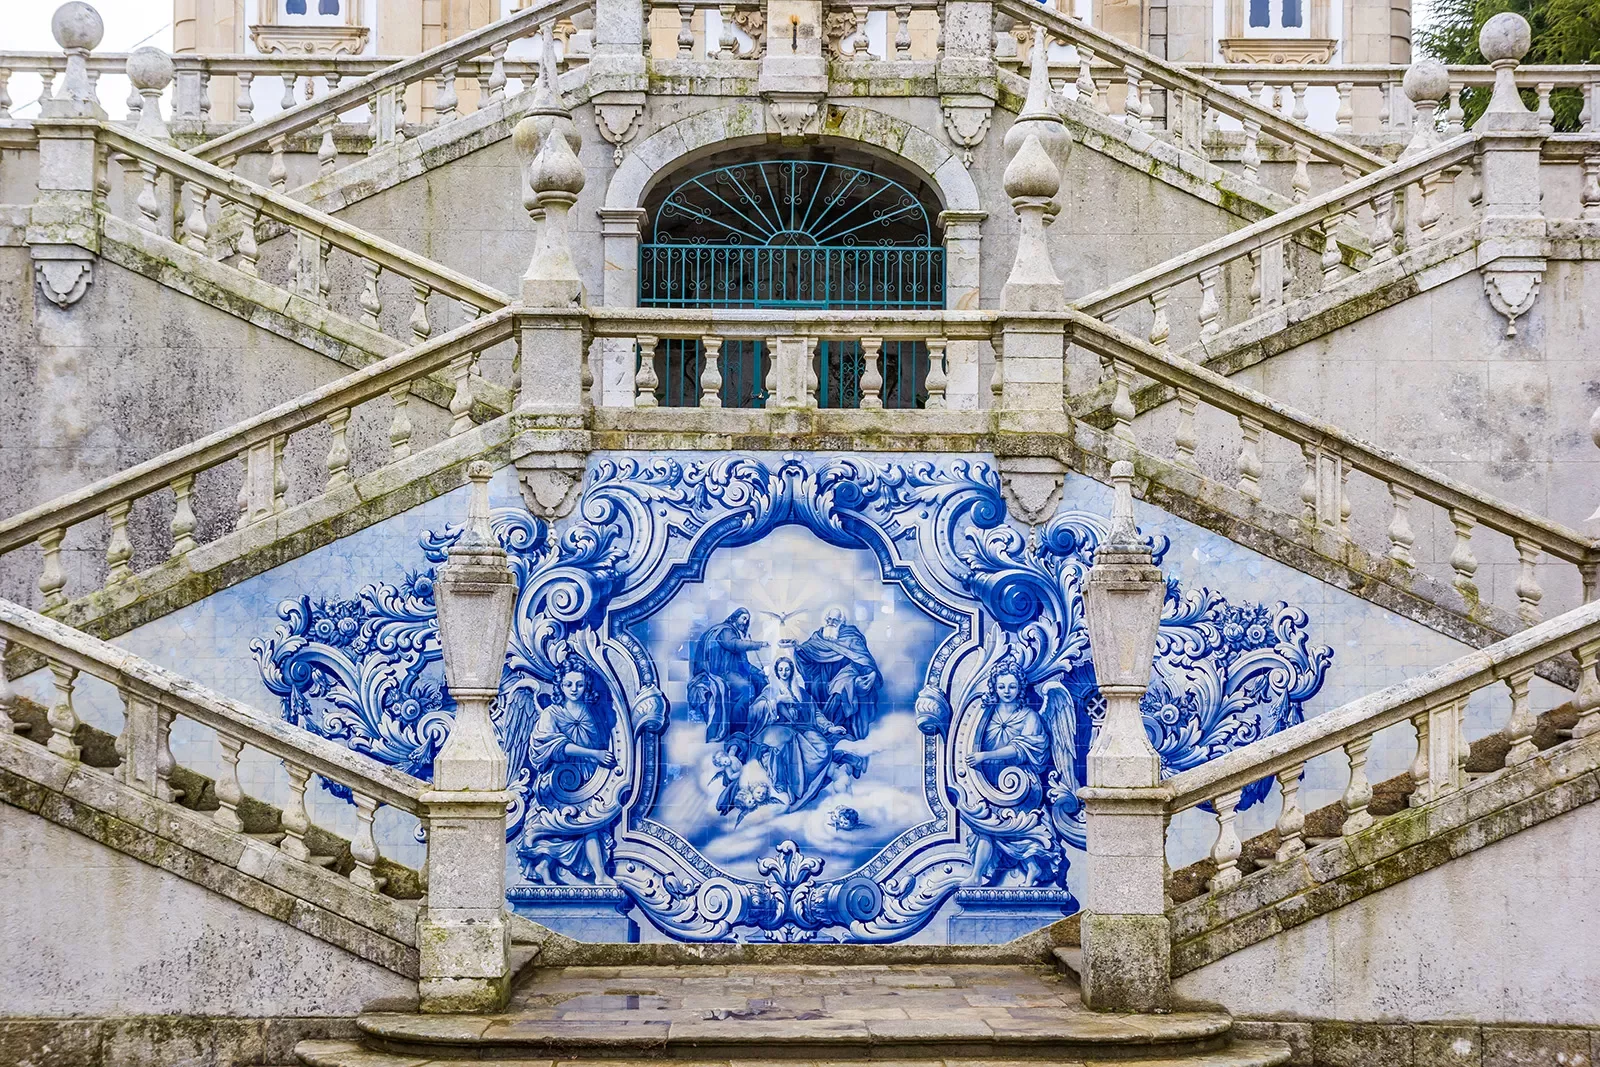 Cathedral stairs, detailed blue mosaic of religious significance below.